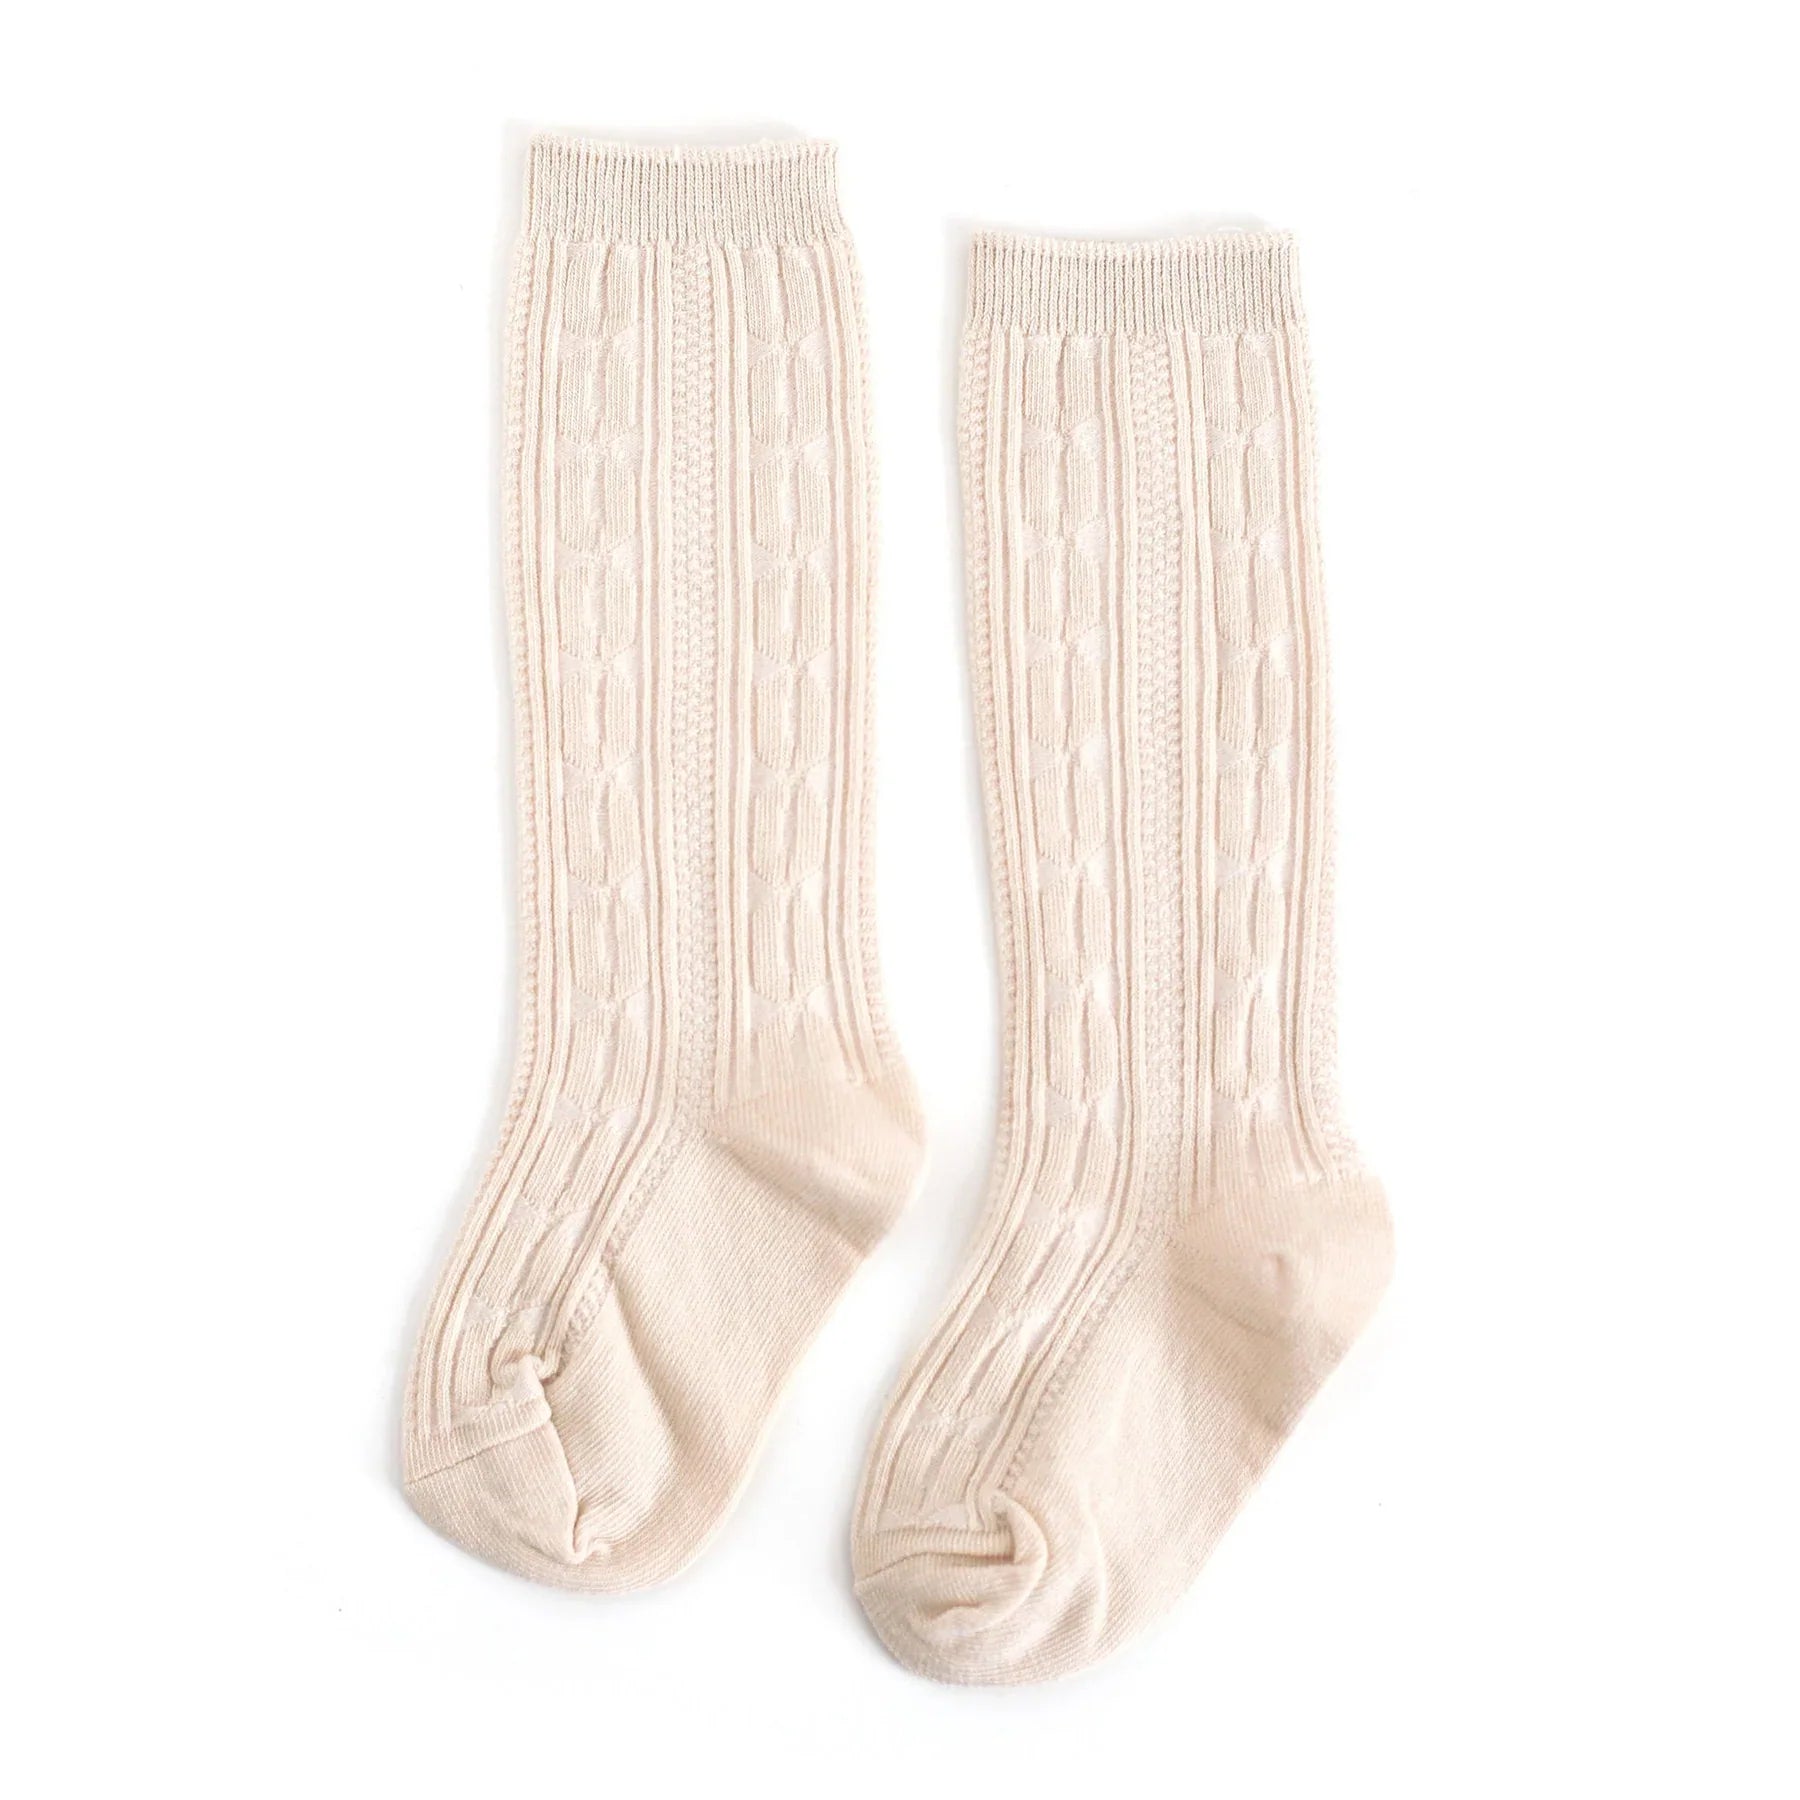 Little Stocking Co. Vanilla Cream Cable Knit Knee Highs